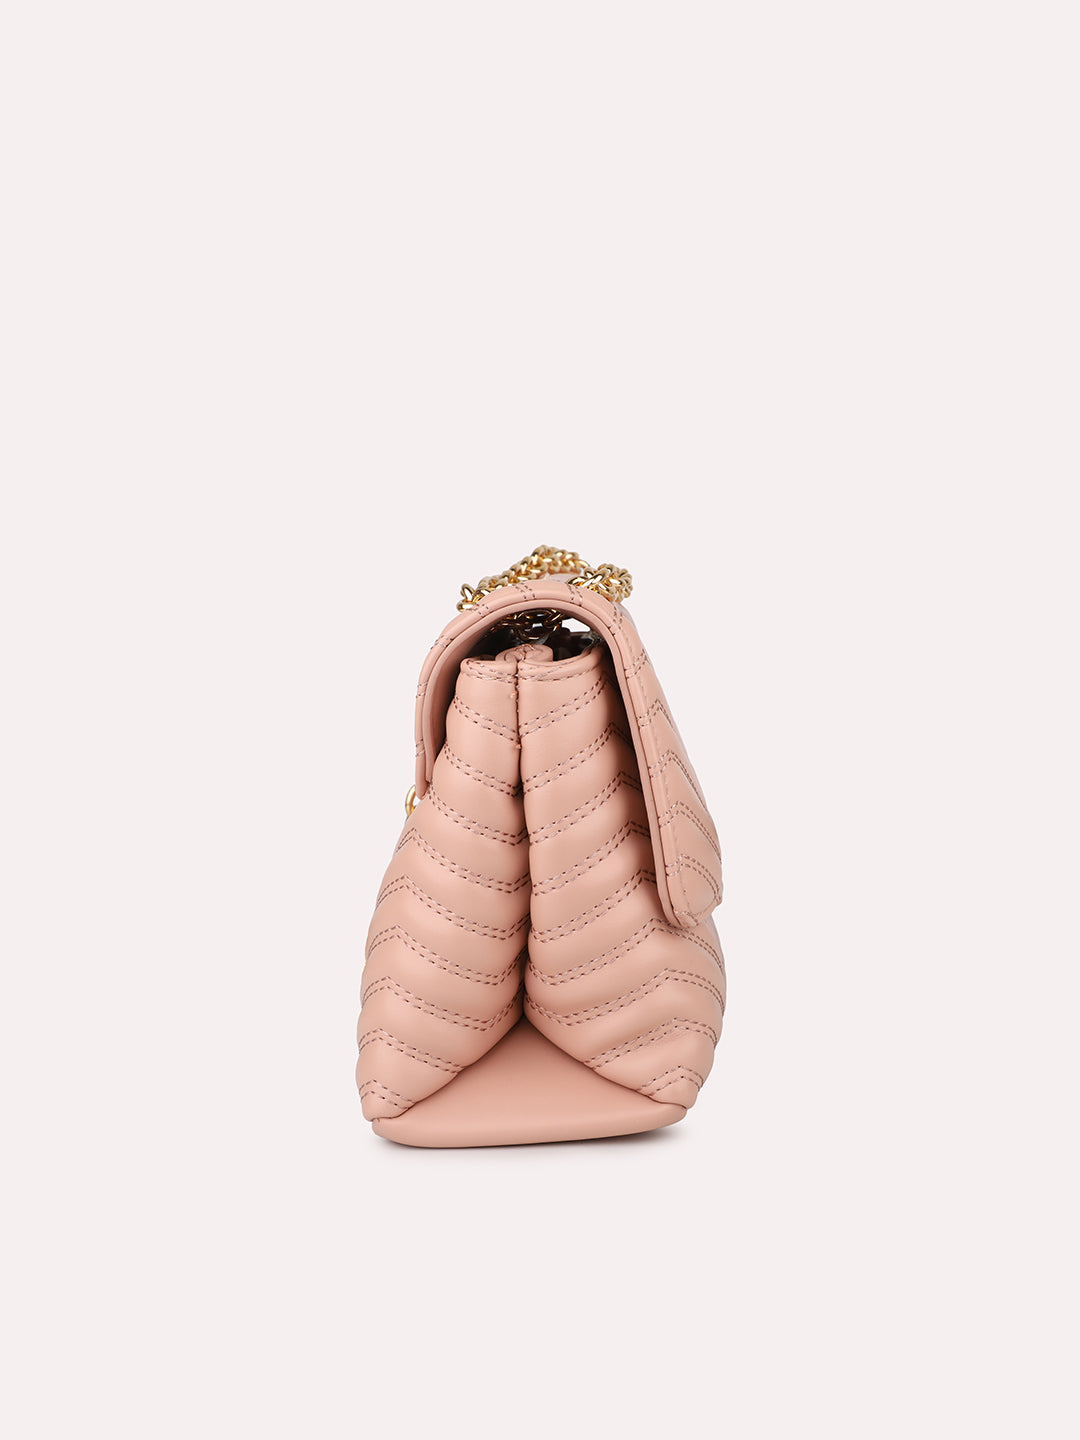 Textu Pink Structured Chain Sling Bag With Quilted Detailing